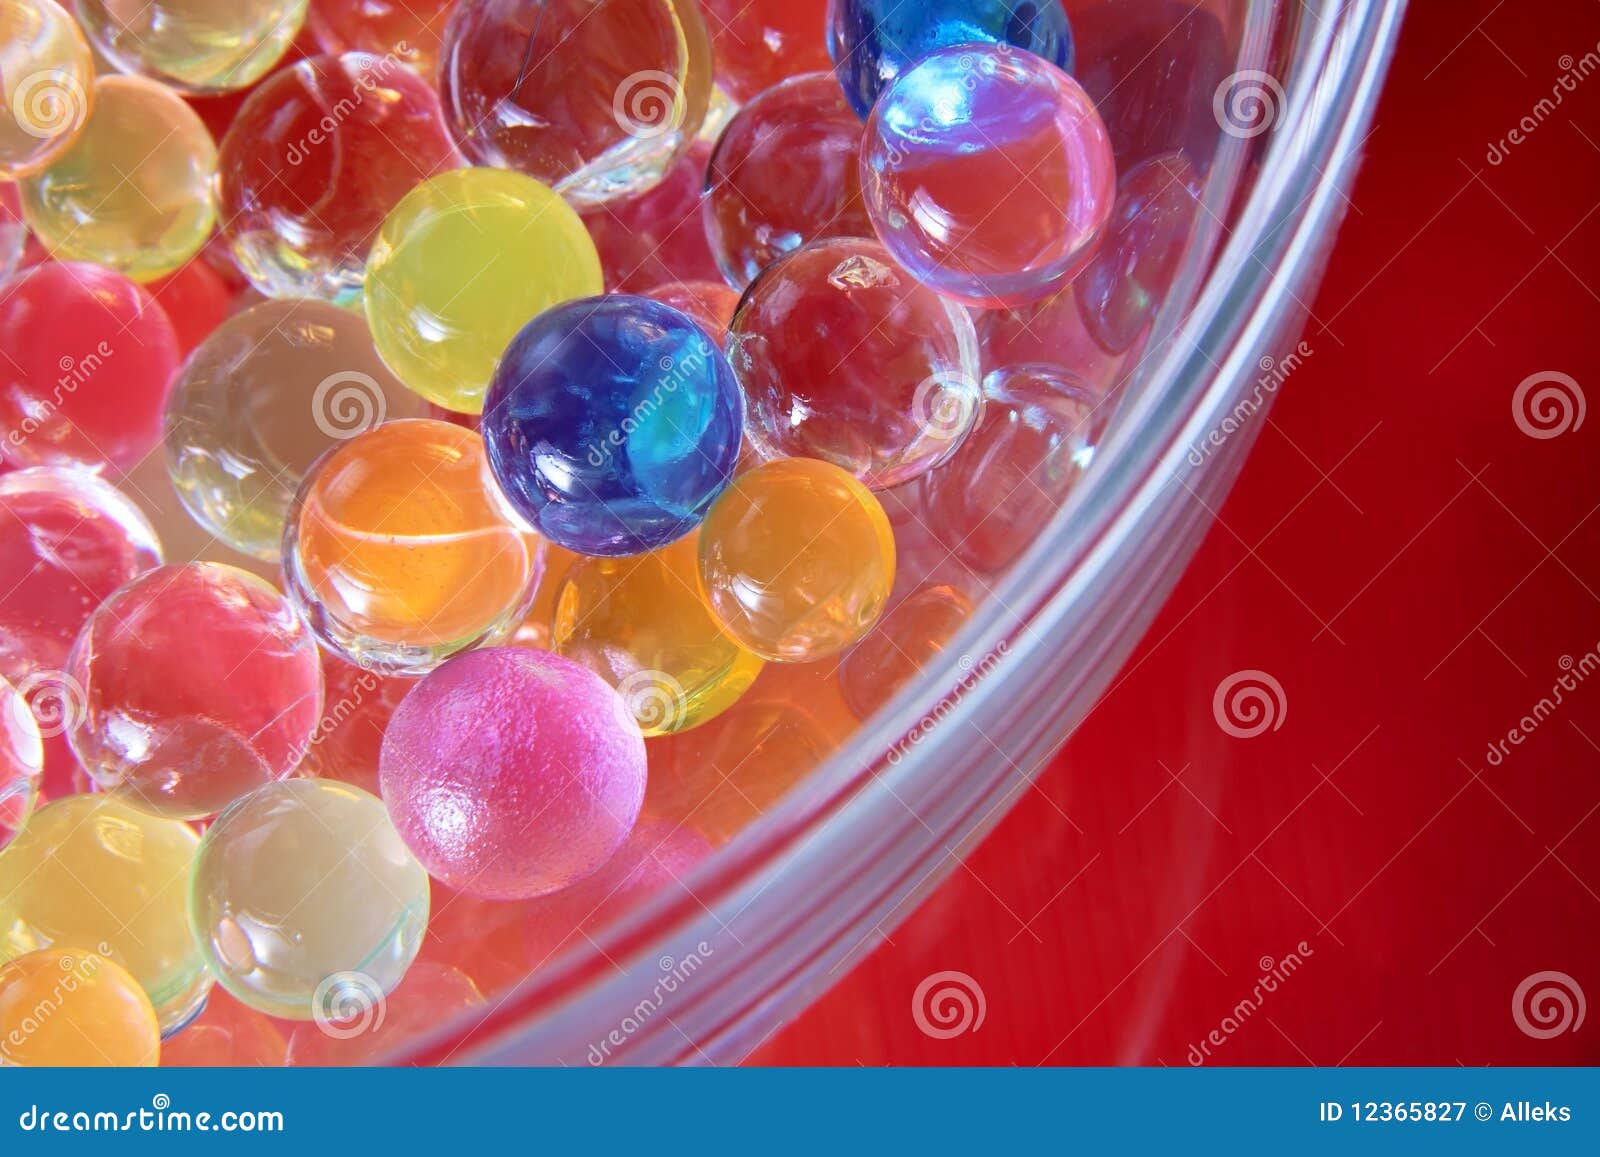 abstract colorful balls in glass bawl